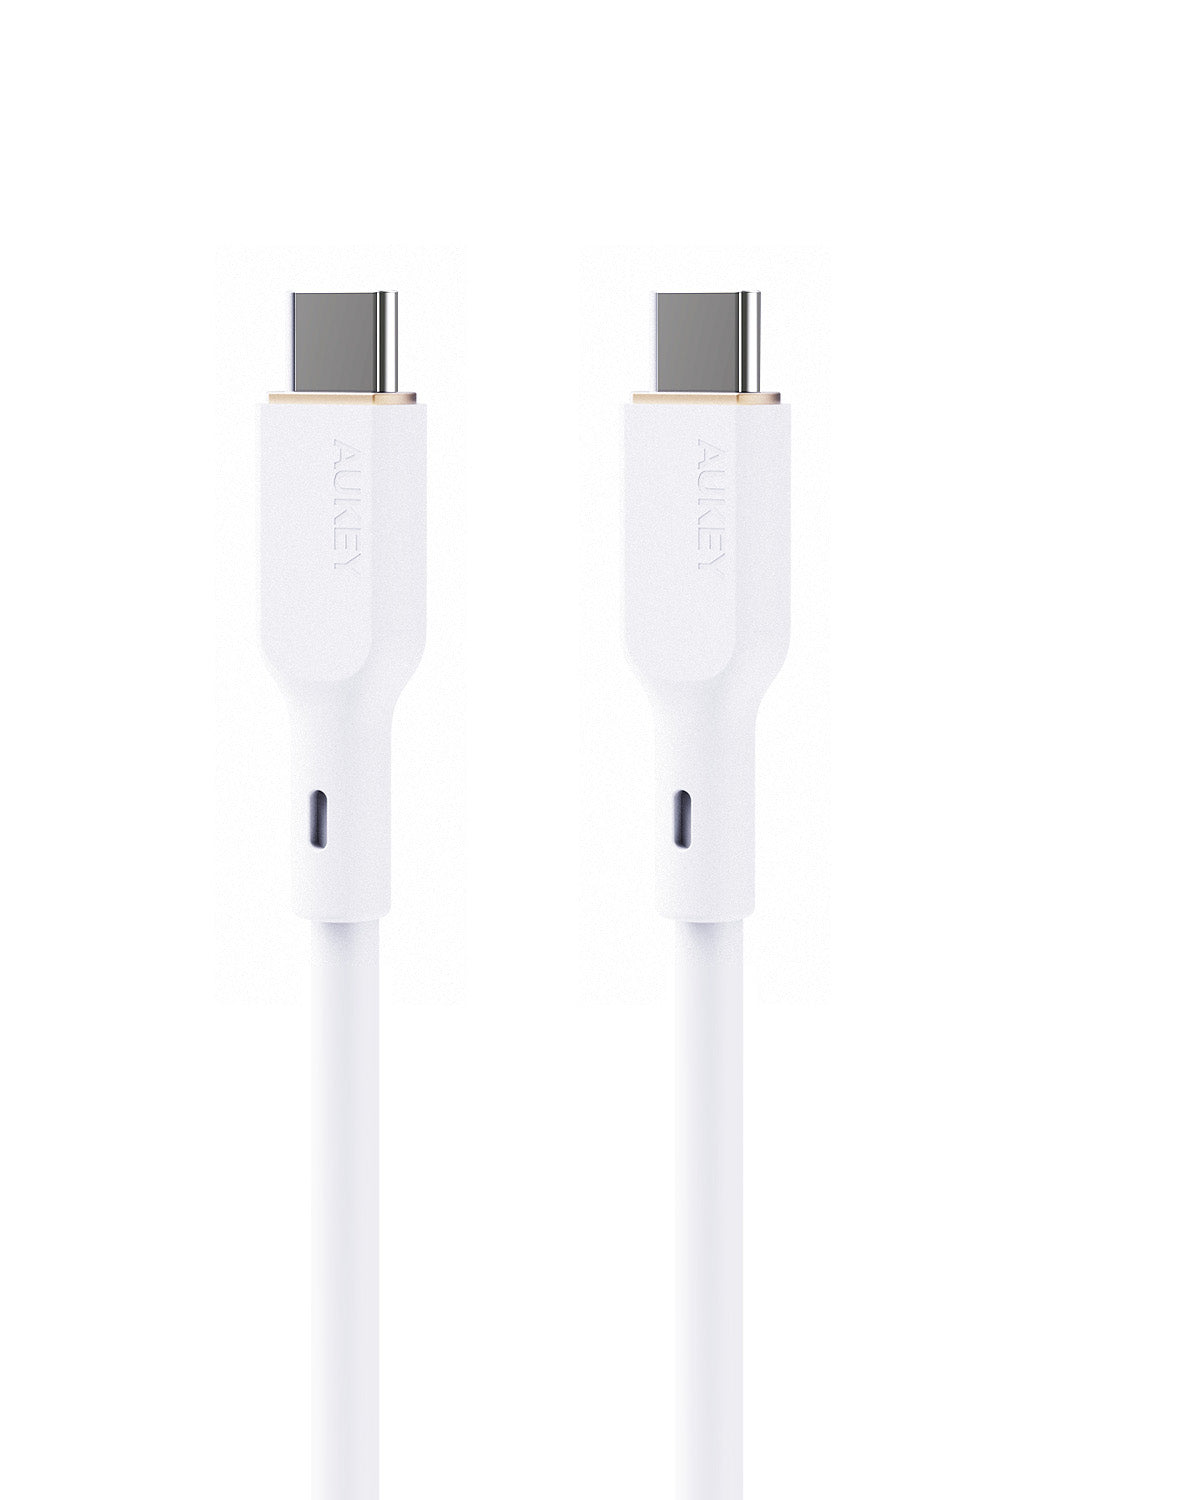 CB-SCC241 Circlet Blink 240W Silicone USB-C to USB-C Cable